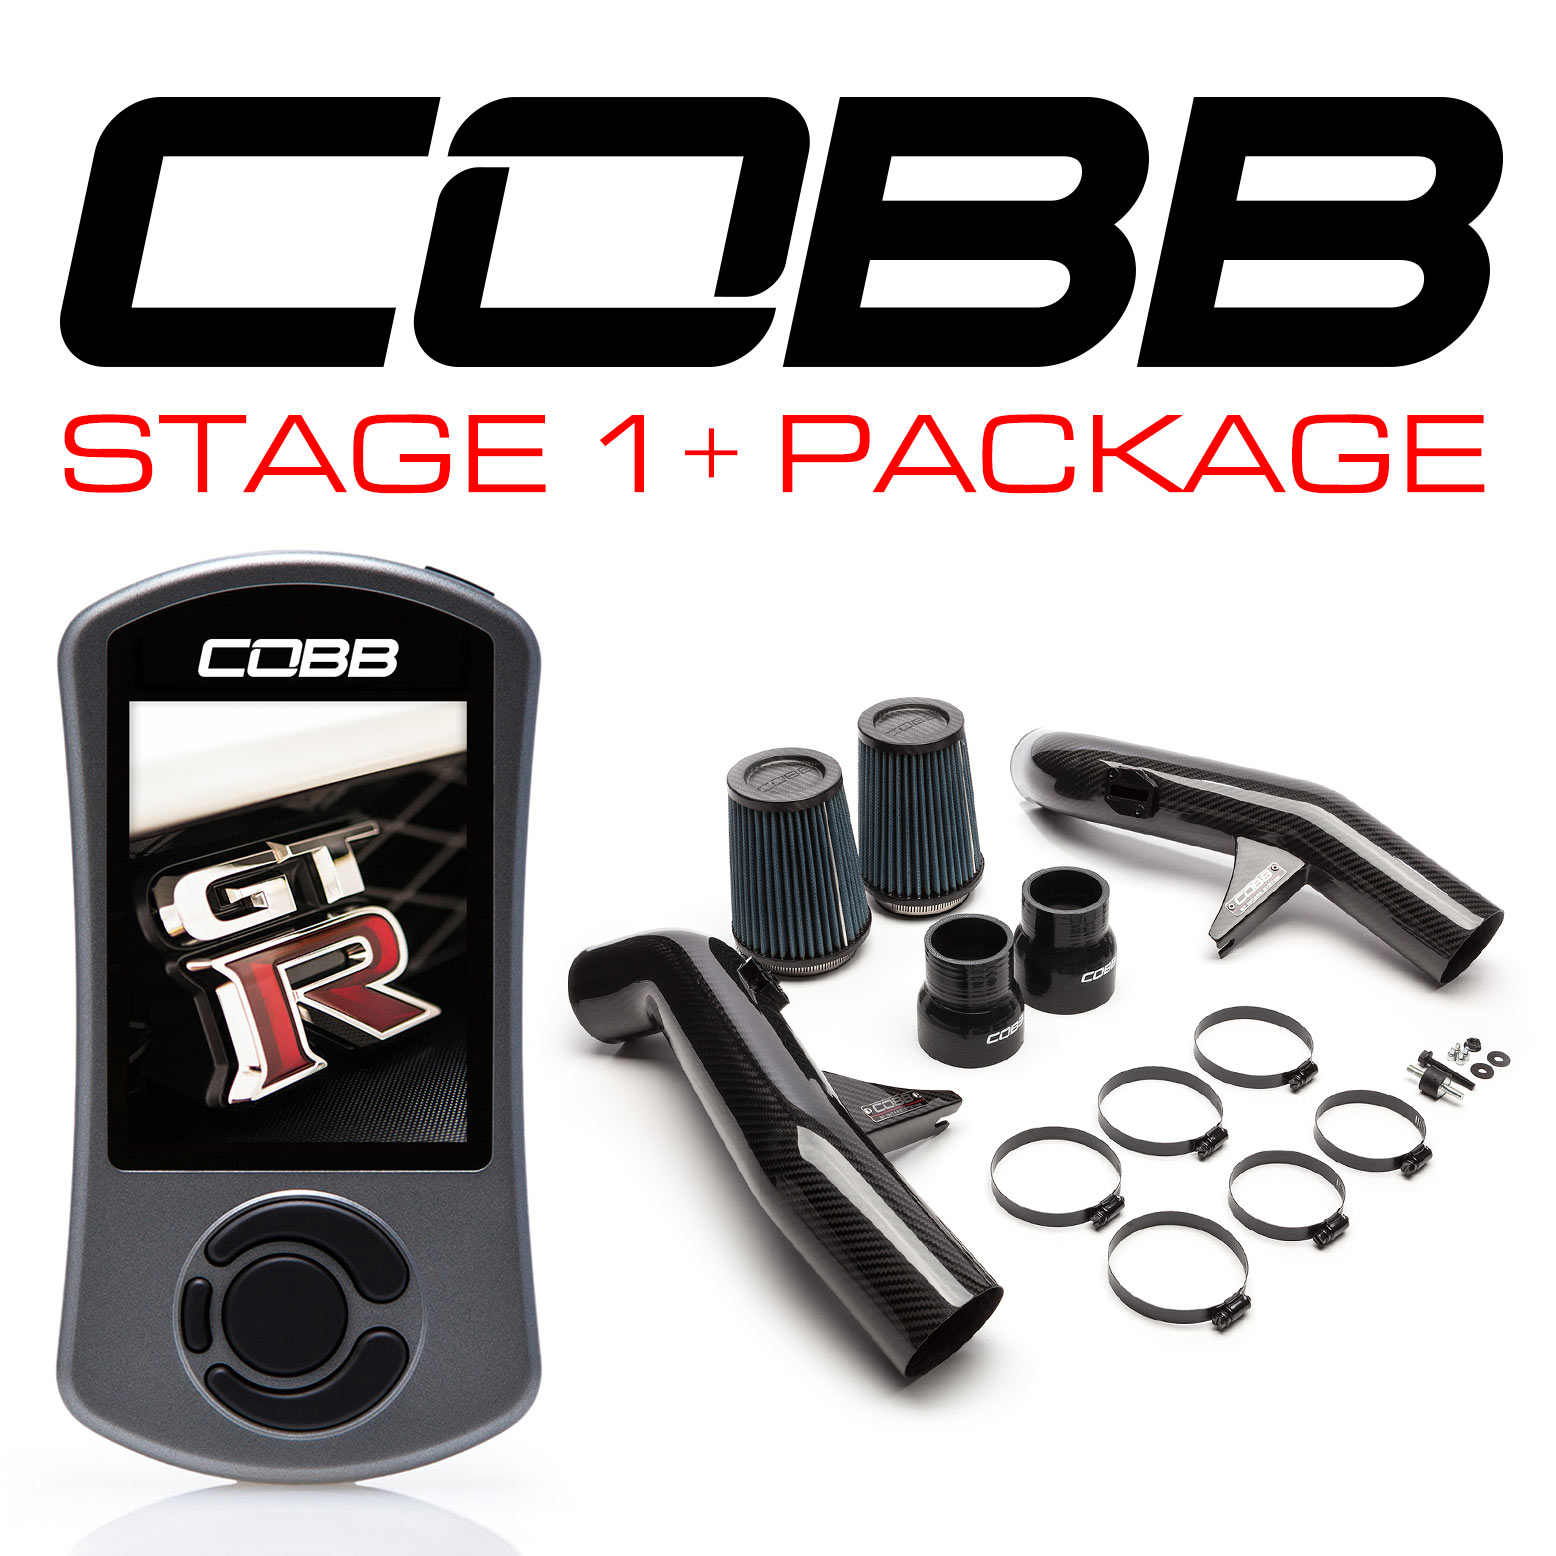 Nissan GT-R Stage 1 + Carbon Fiber Power Package NIS-008 with TCM Flashing